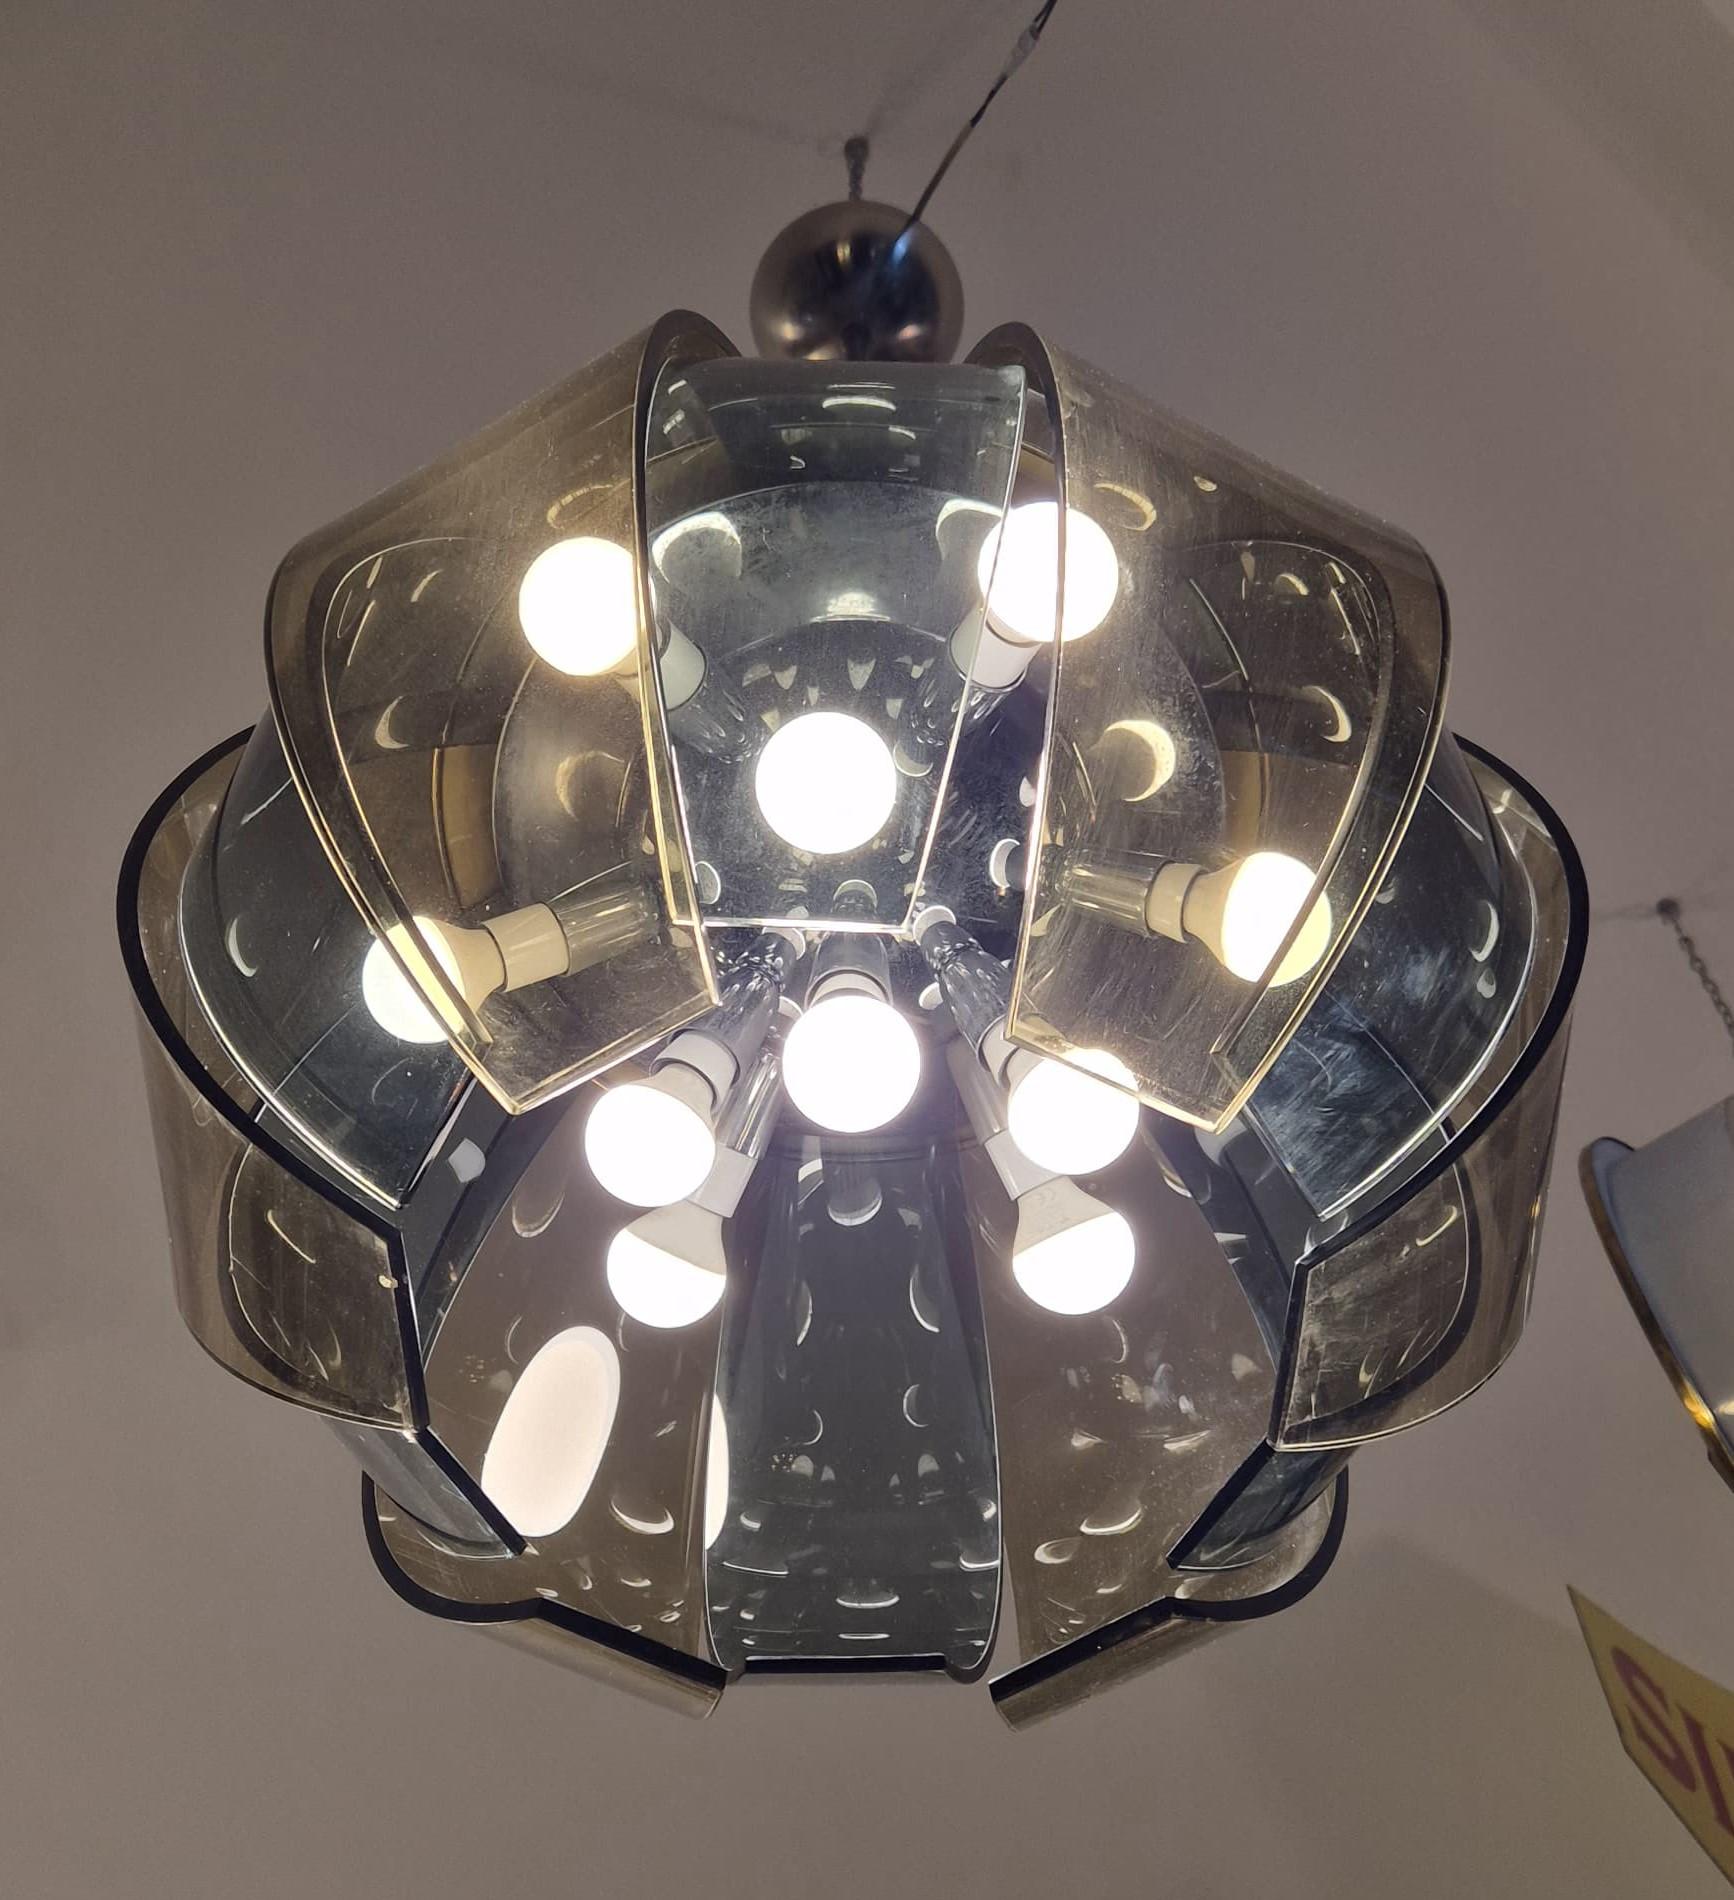 Stilnovo pendant lamp, metal frame with 10 bulbs and 12 two-tone glasses.